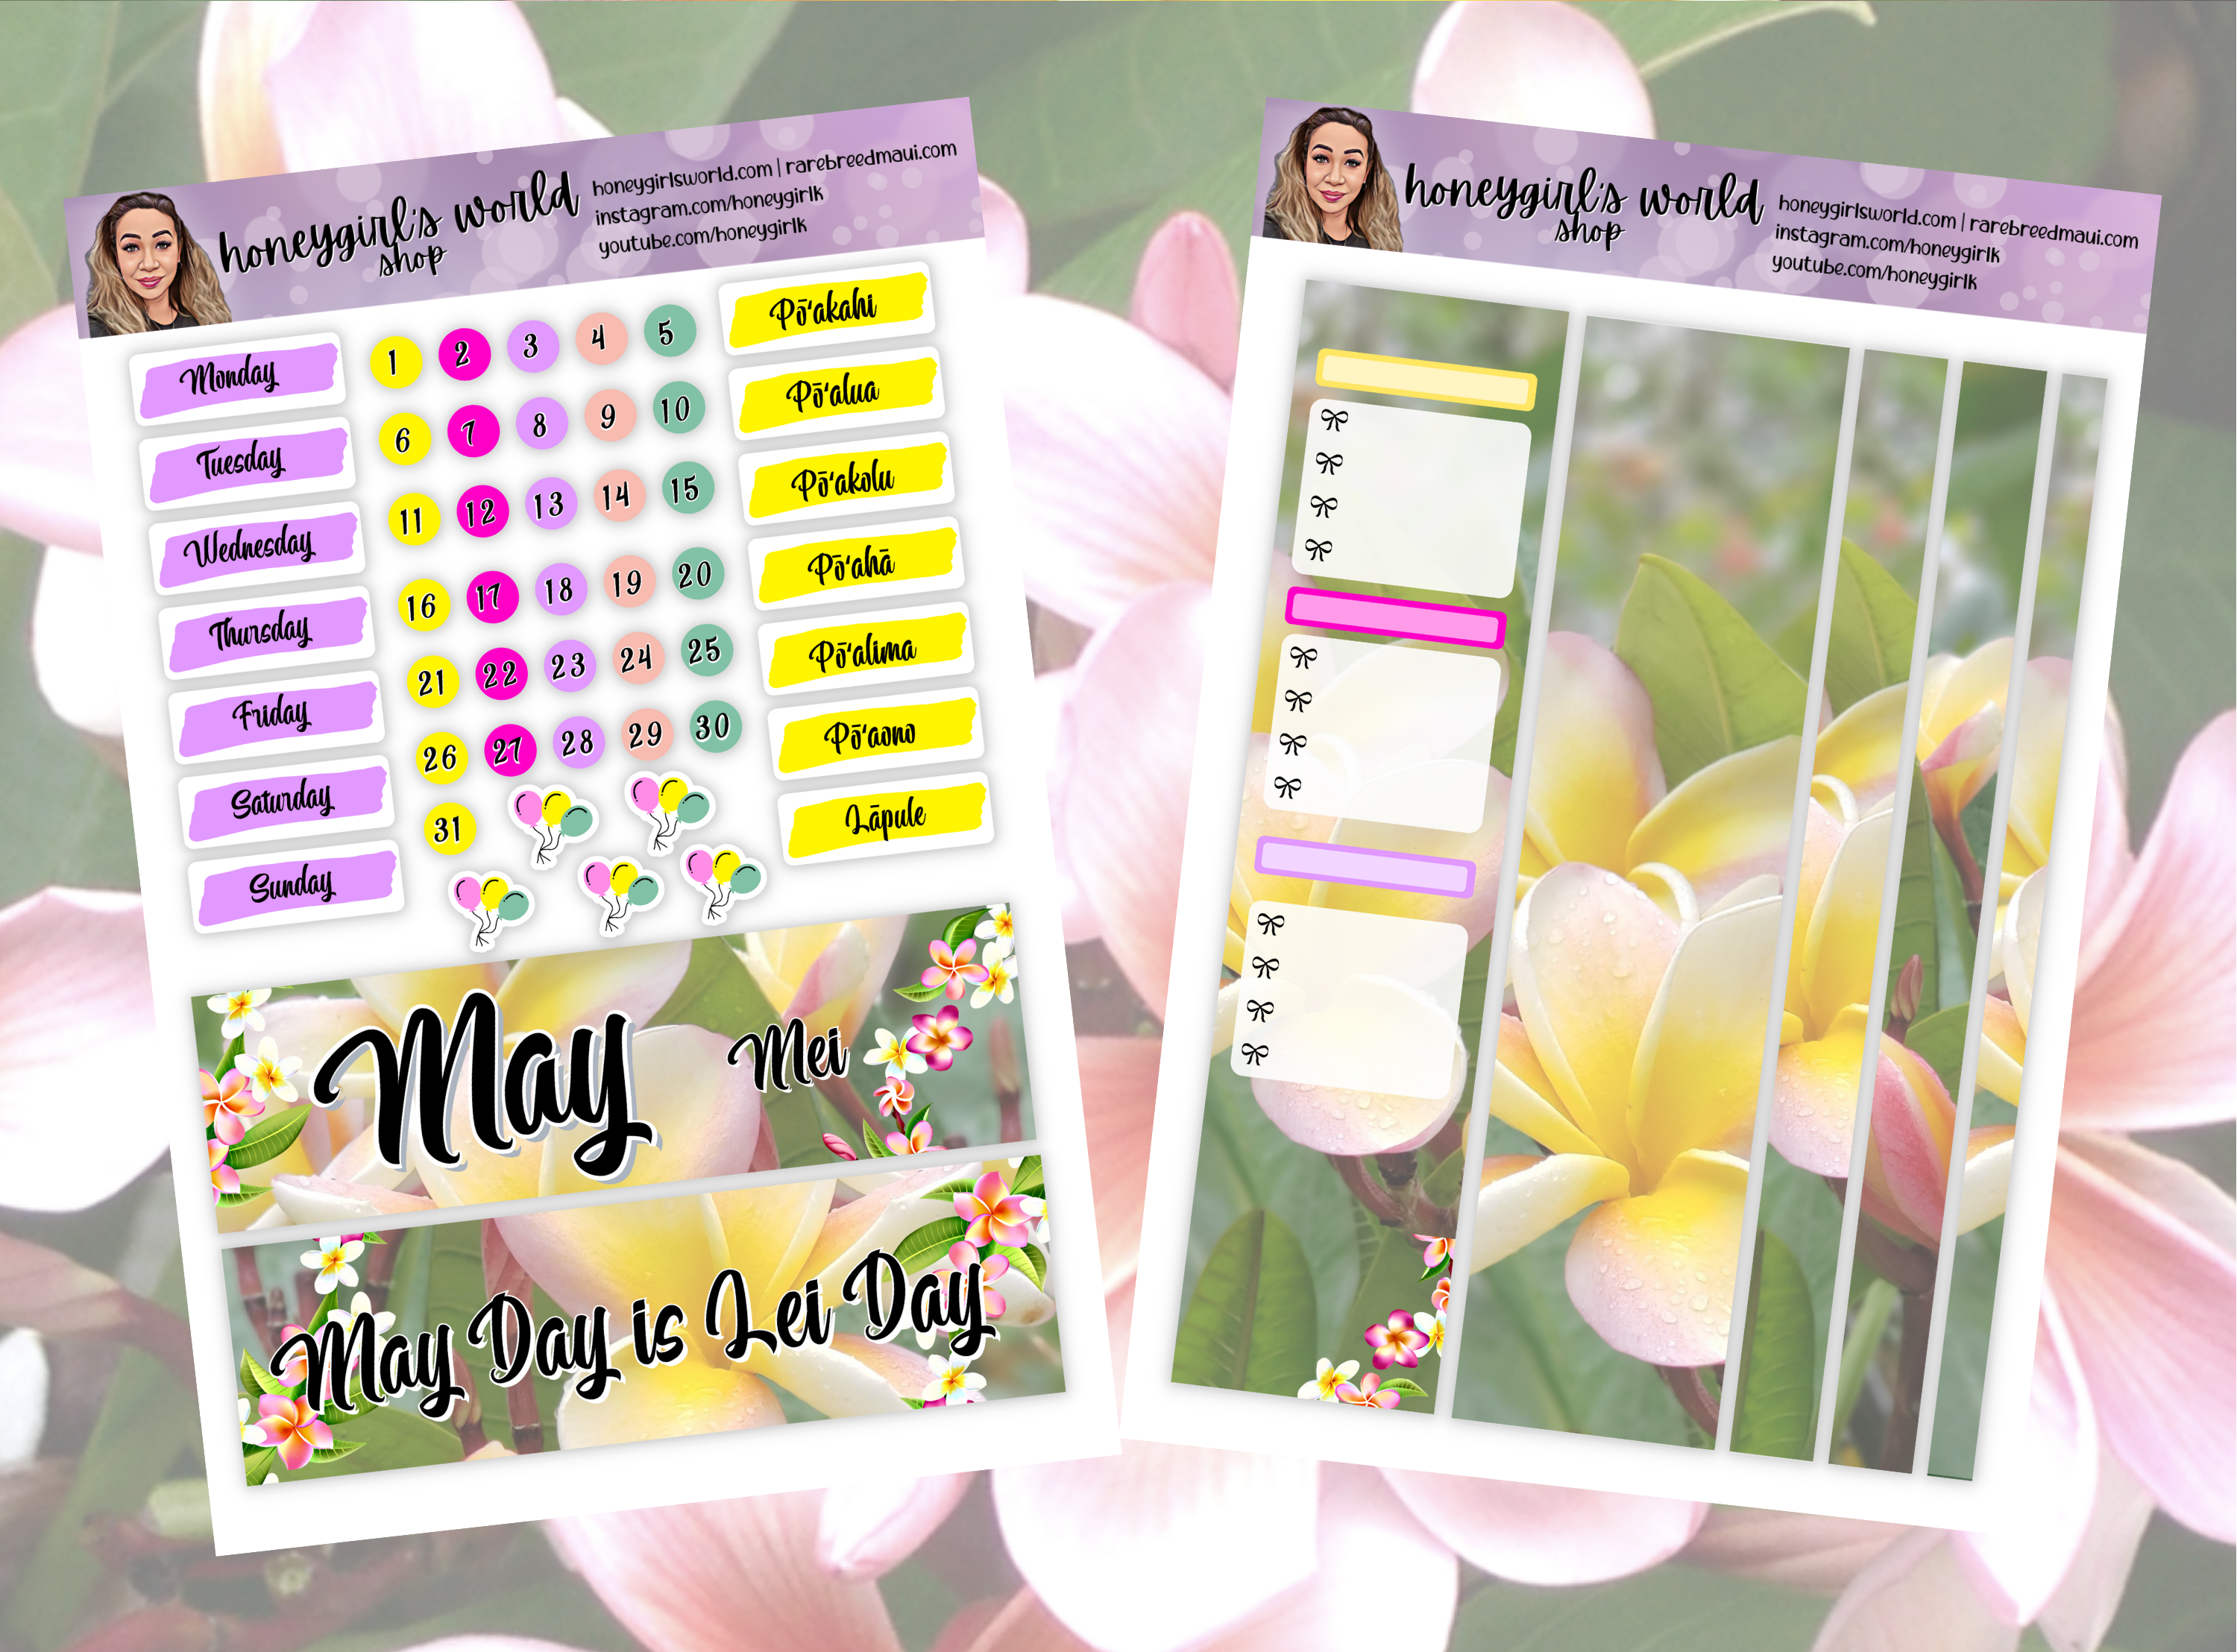 Transparent Monthly Planner Flower Stickers (12 Sheets) - Clear Floral Stickers for Calendar Planners